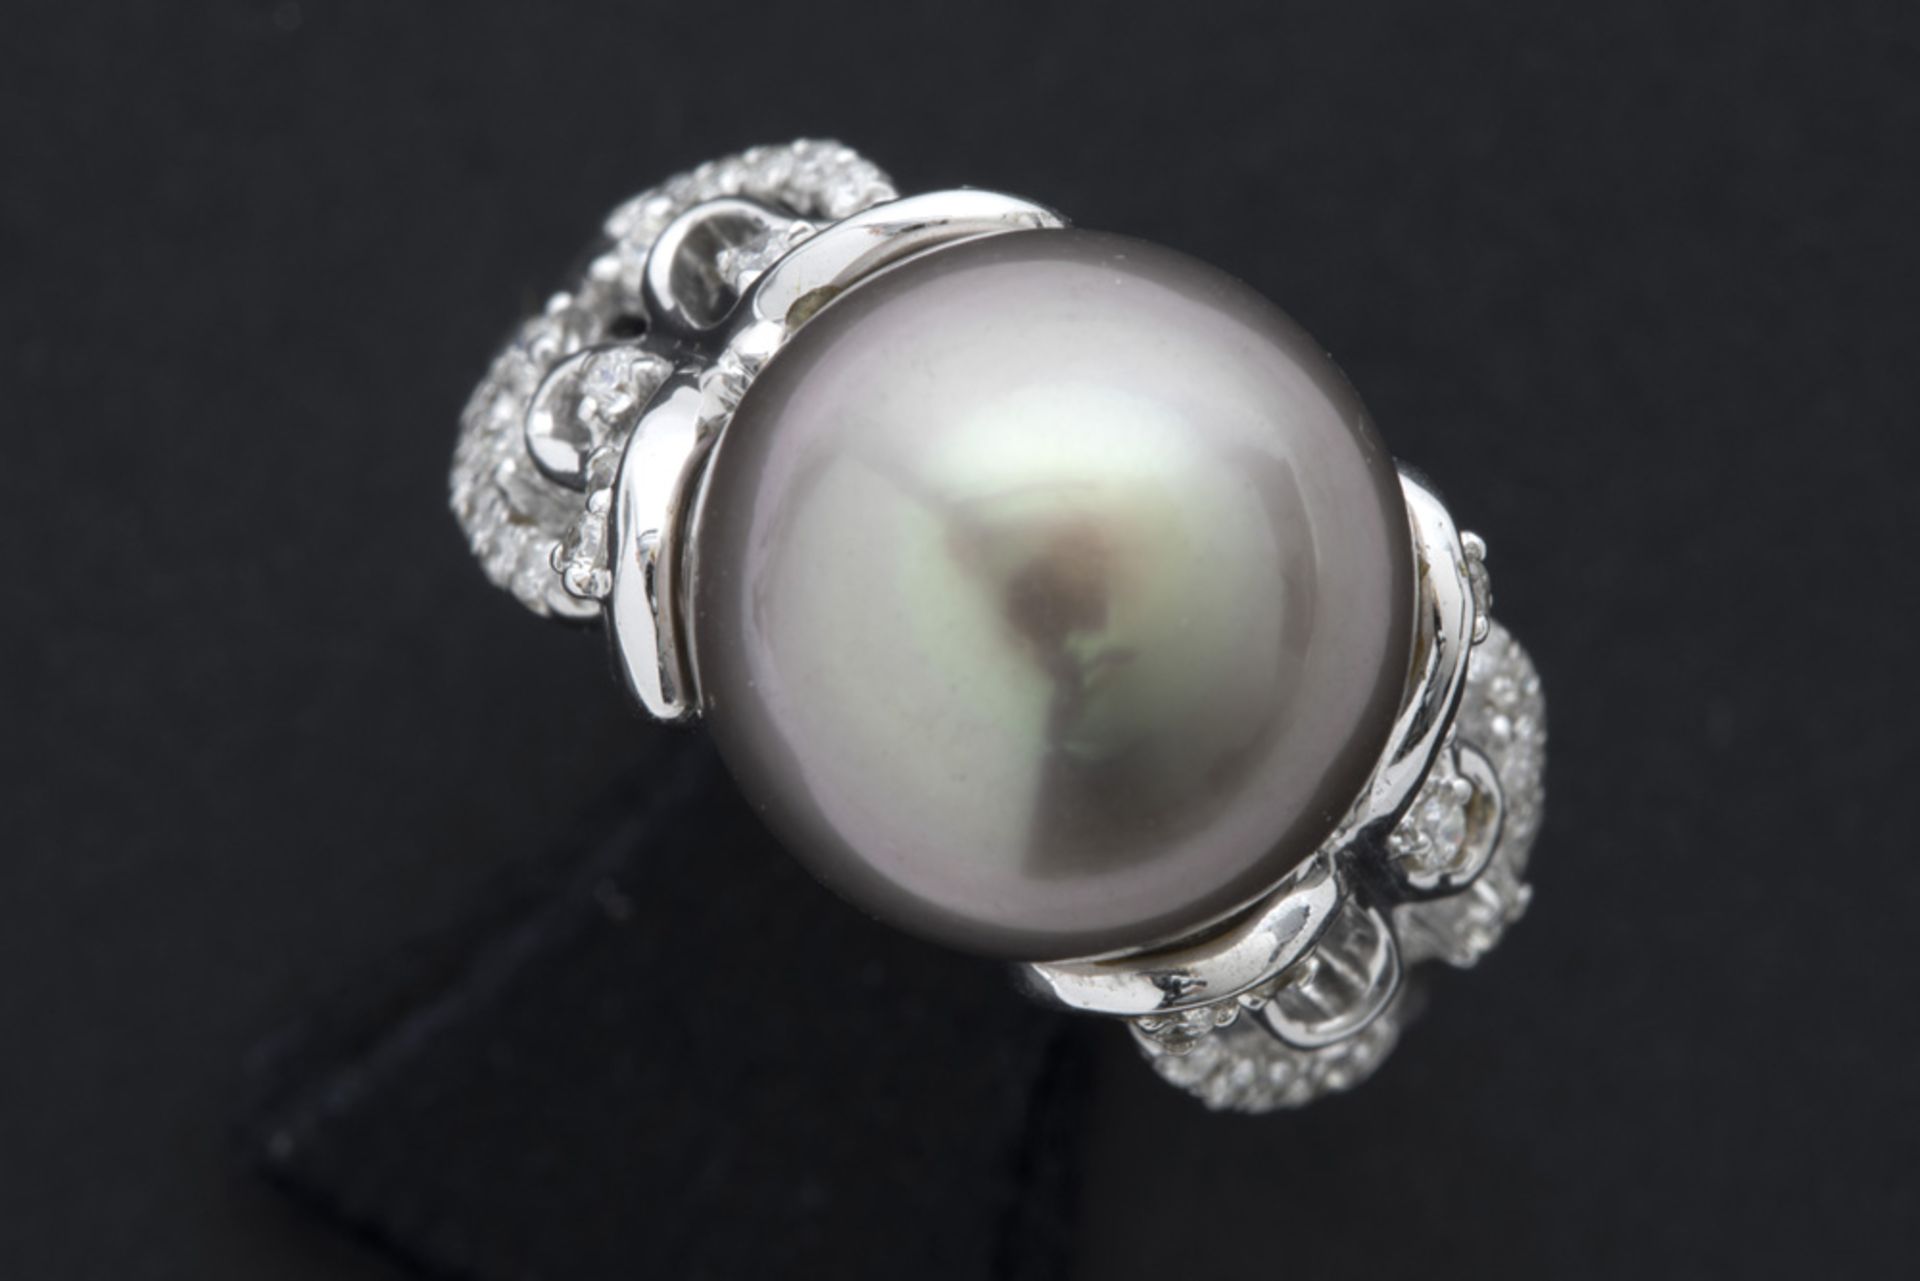 nicely made ring in white gold (18 carat) with a grey pearl and ca 0,40 carat of high quality